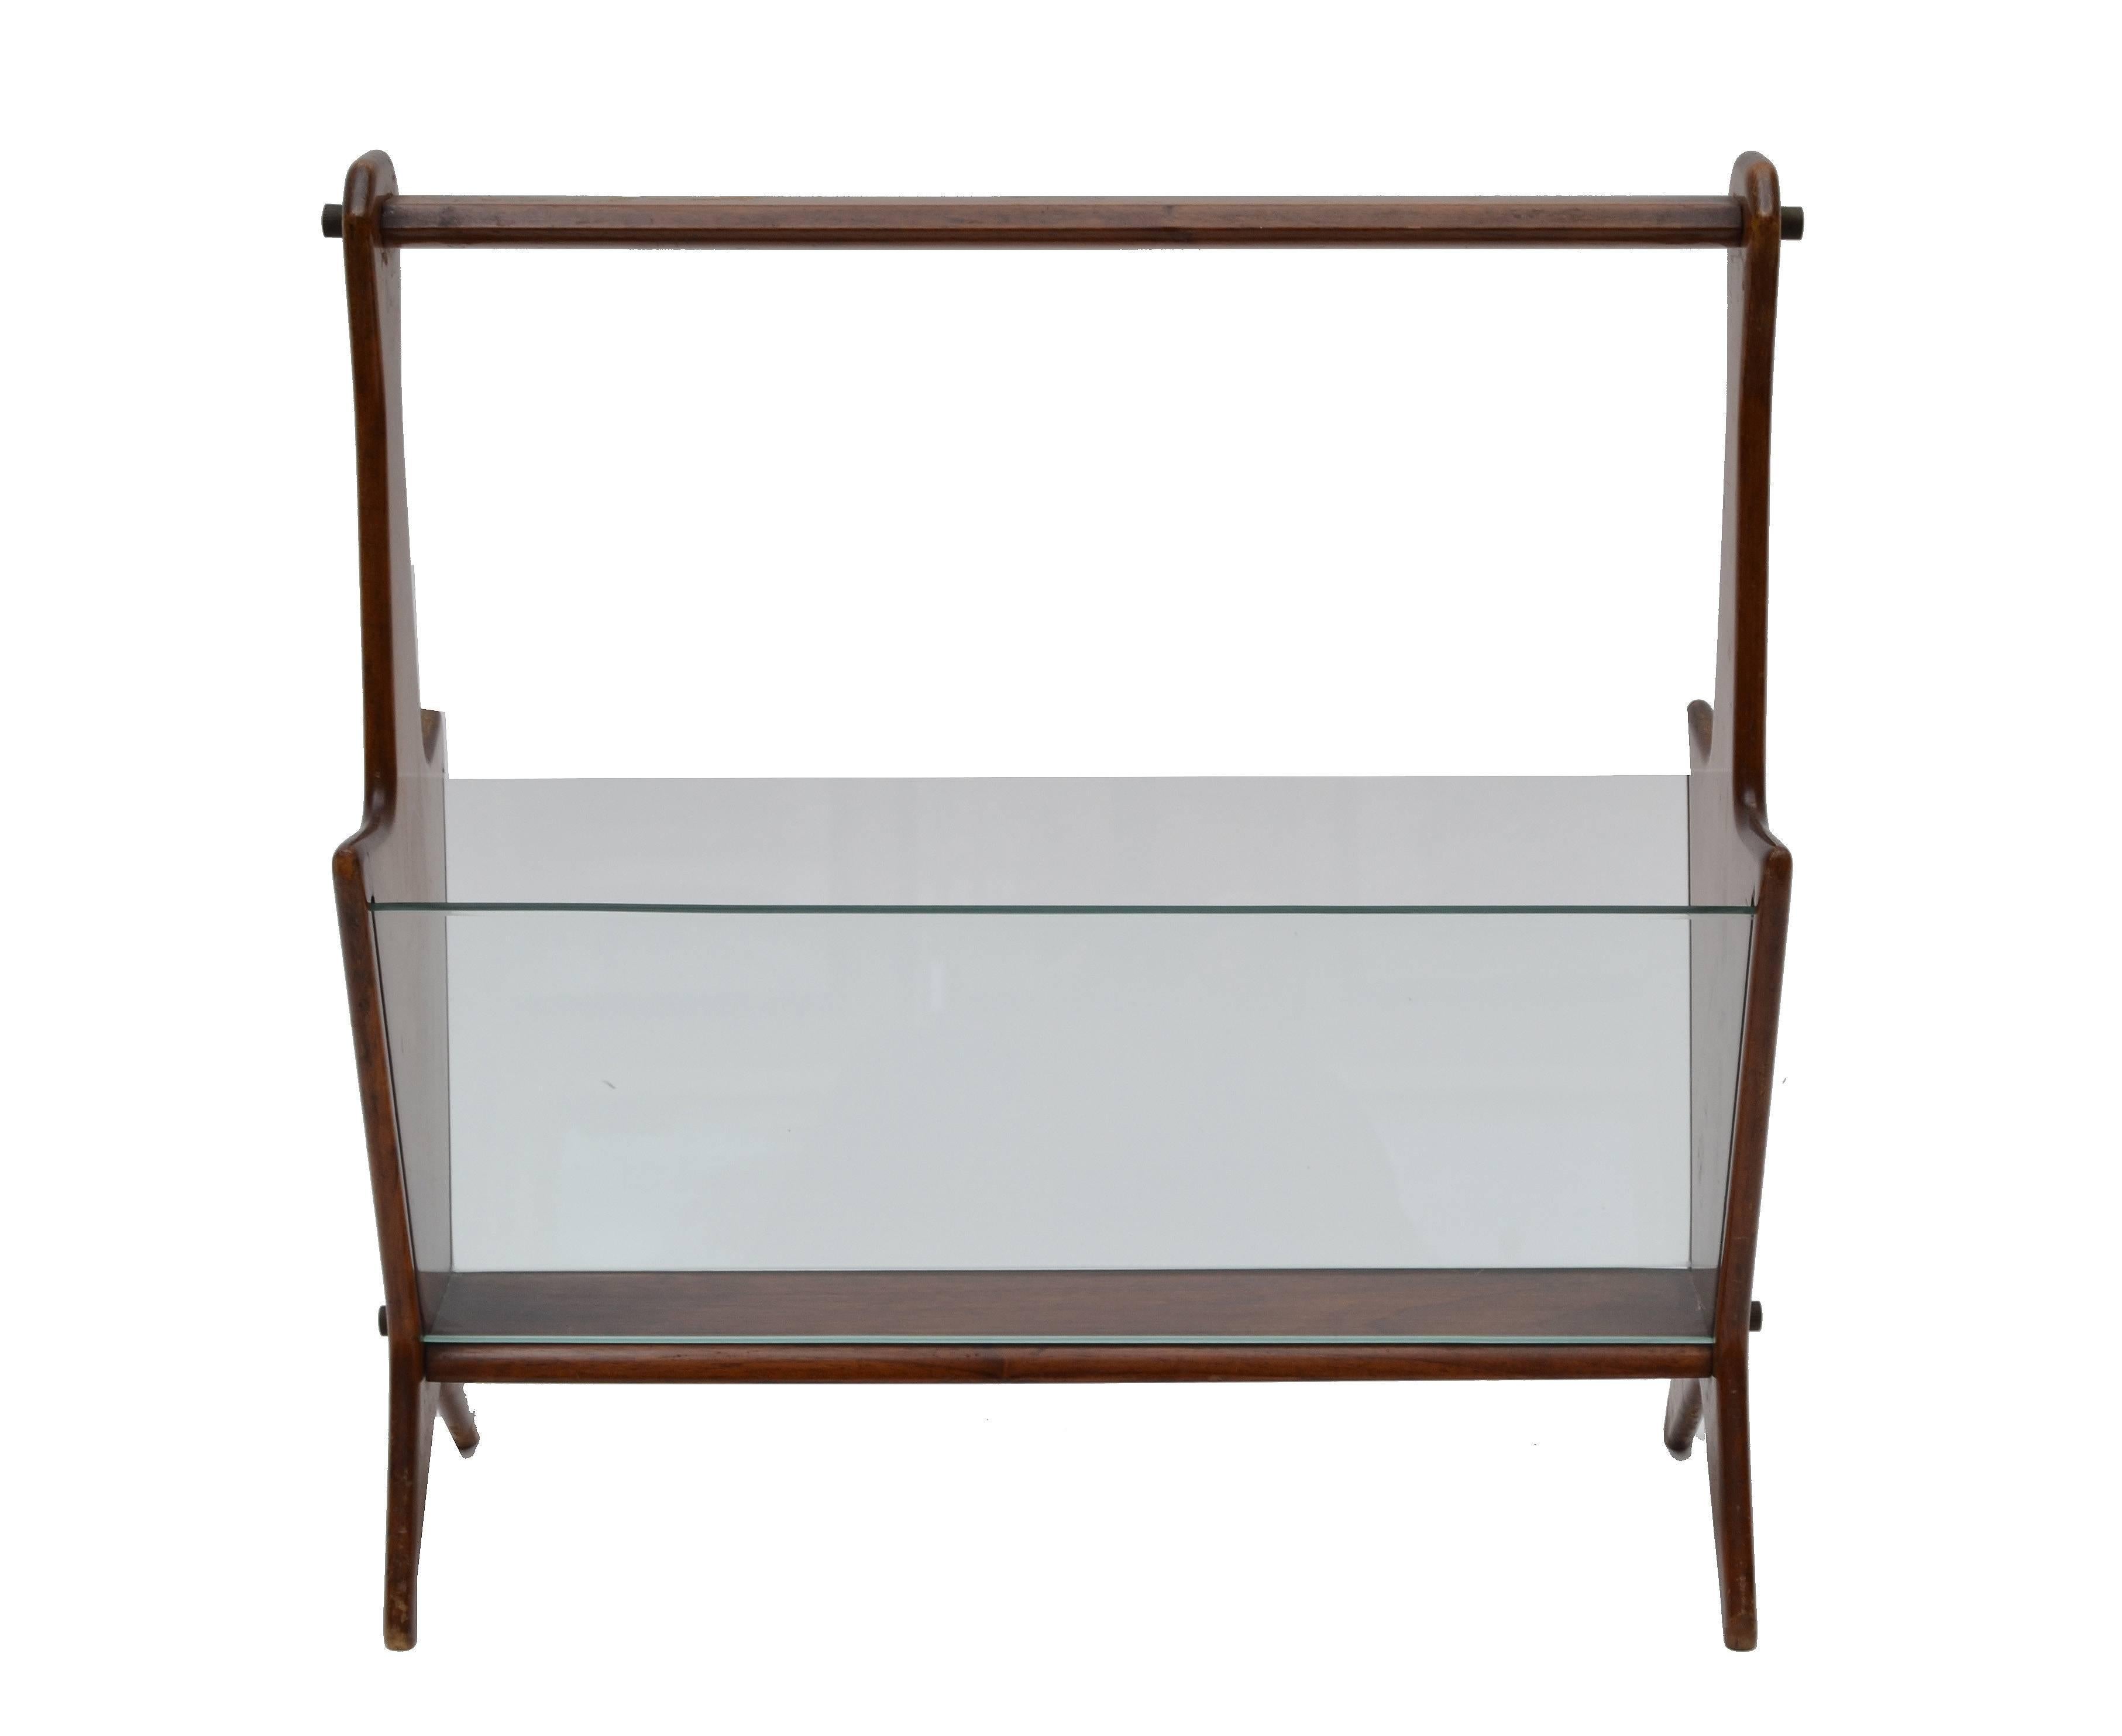 Super chic Ico Parisi Art Deco handmade mahogany magazine rack from Italy made in the 1940s.
Features two glass sheets to find your favorite magazines or books with one grip.
This piece is as functional as decorative.